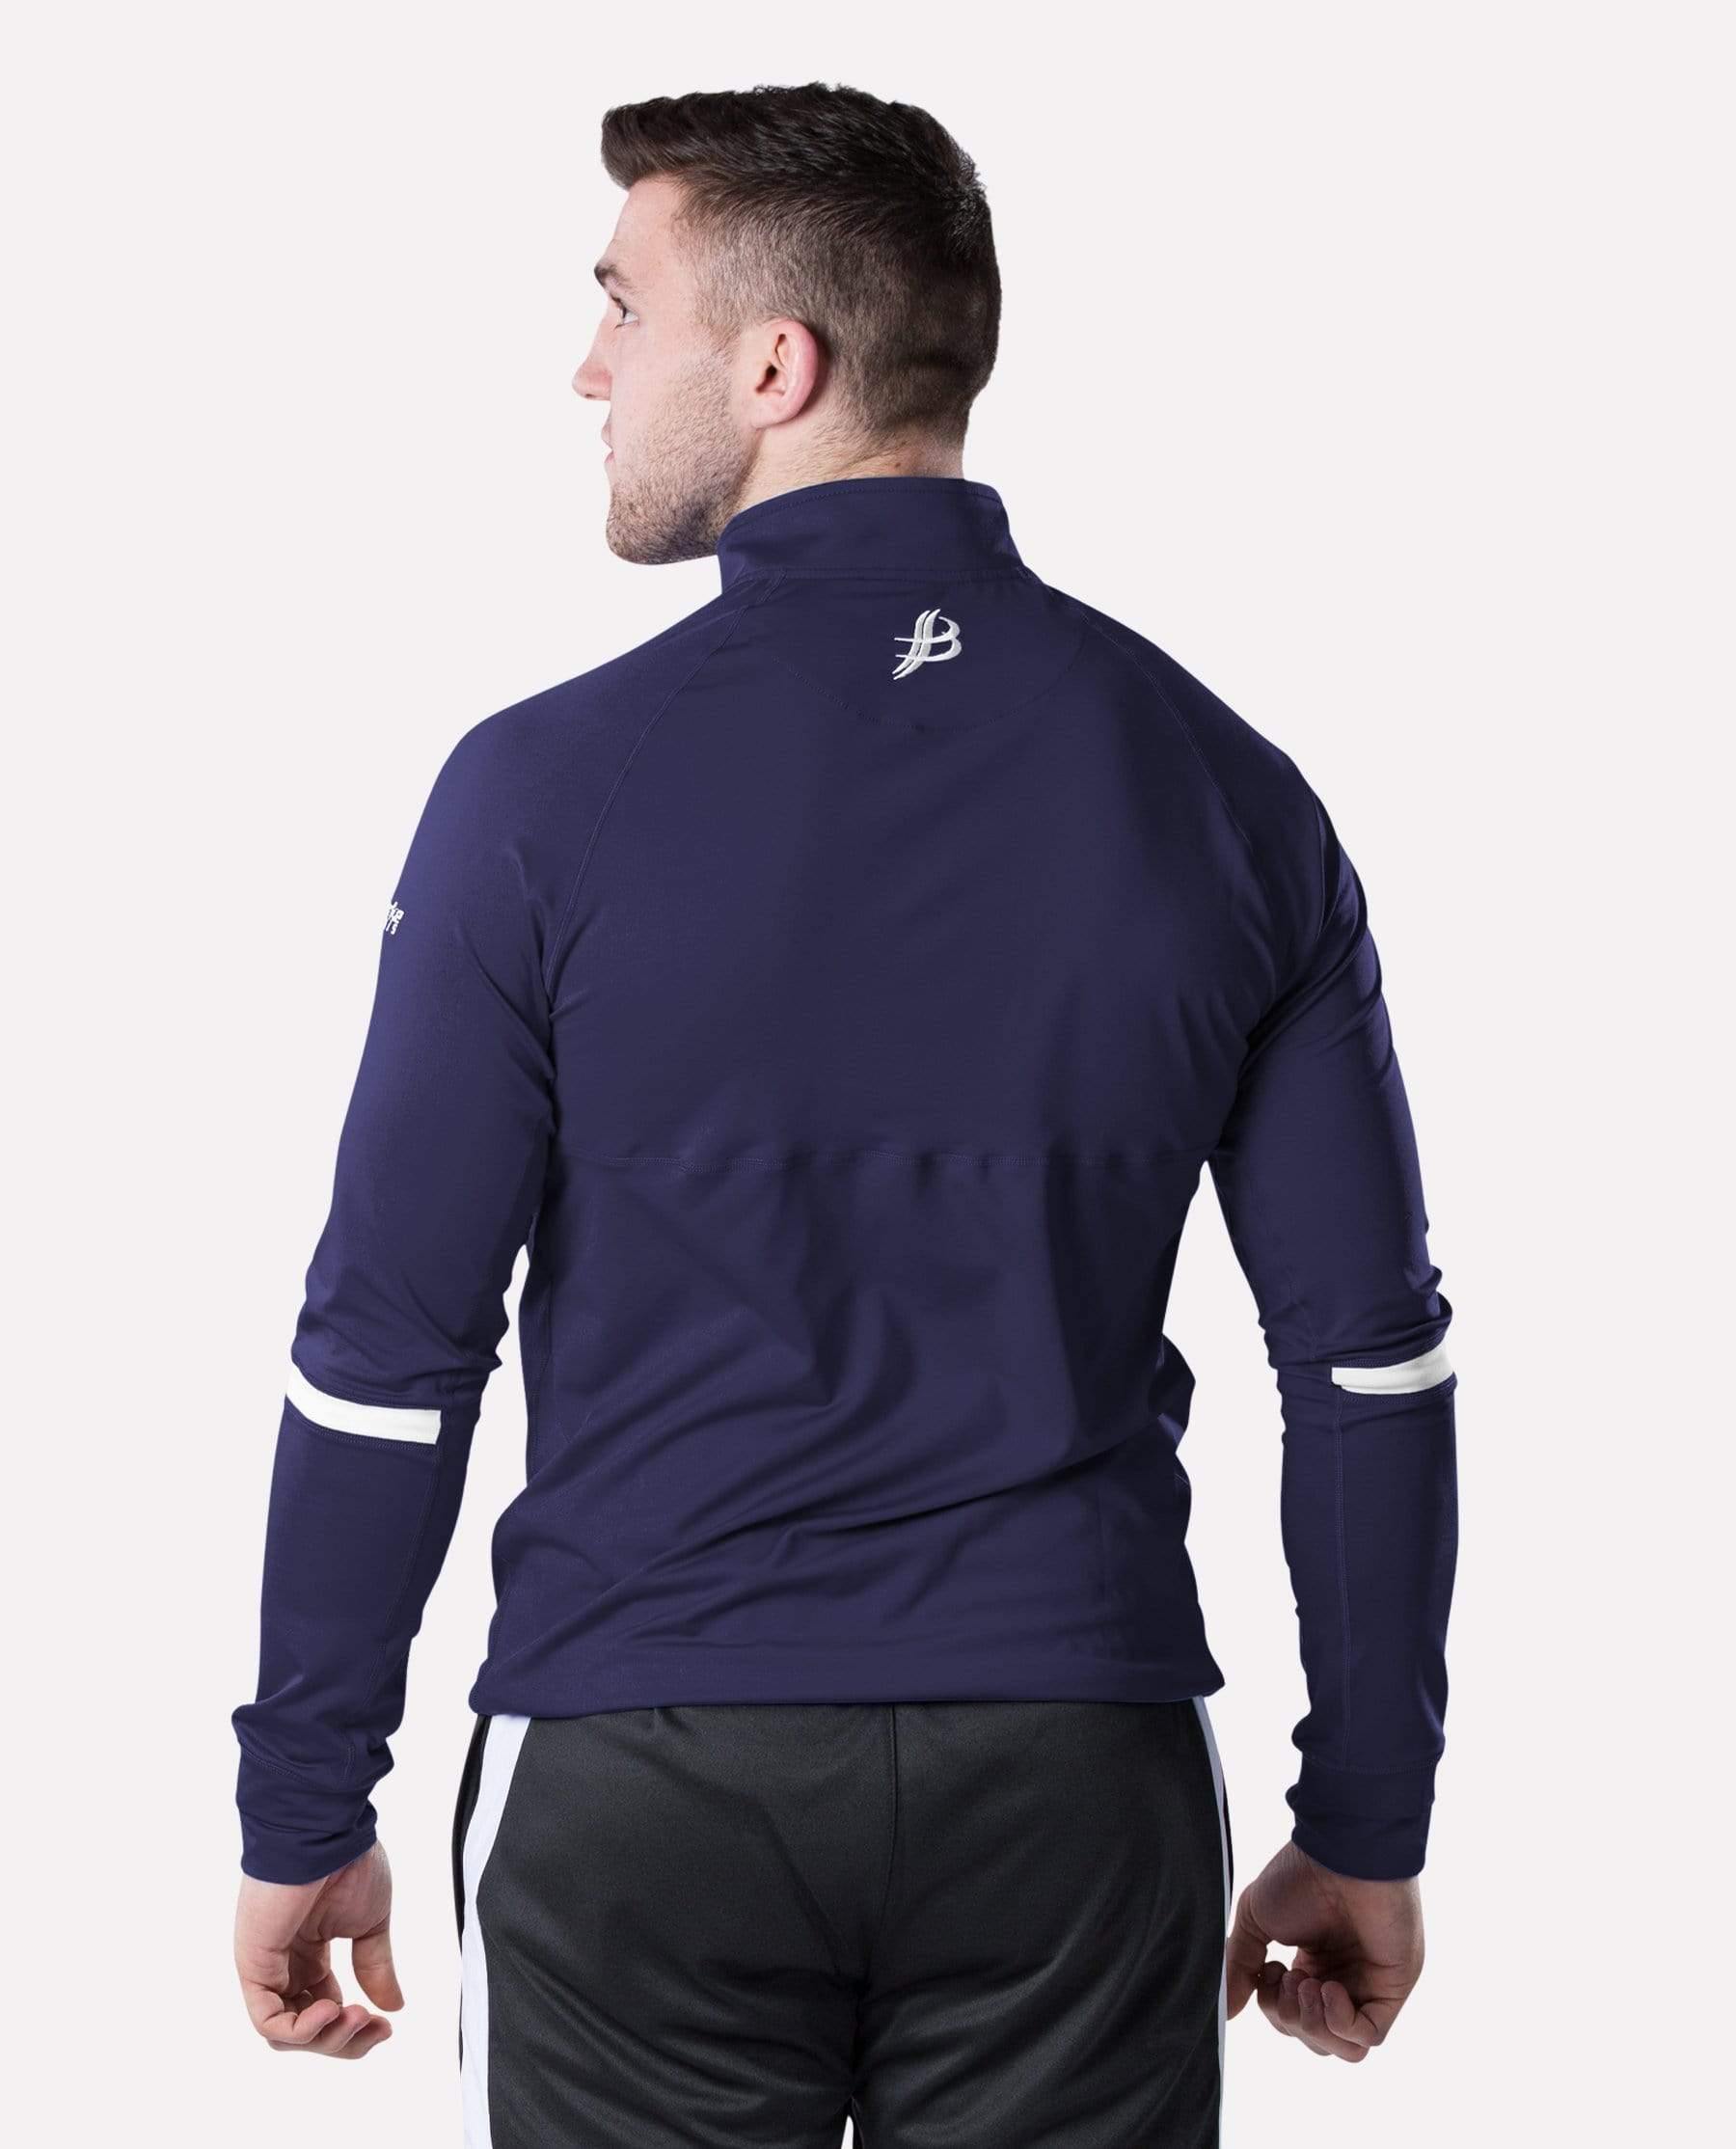 ALPHA Adult Full Zip (Navy/White) - Bourke Sports Limited